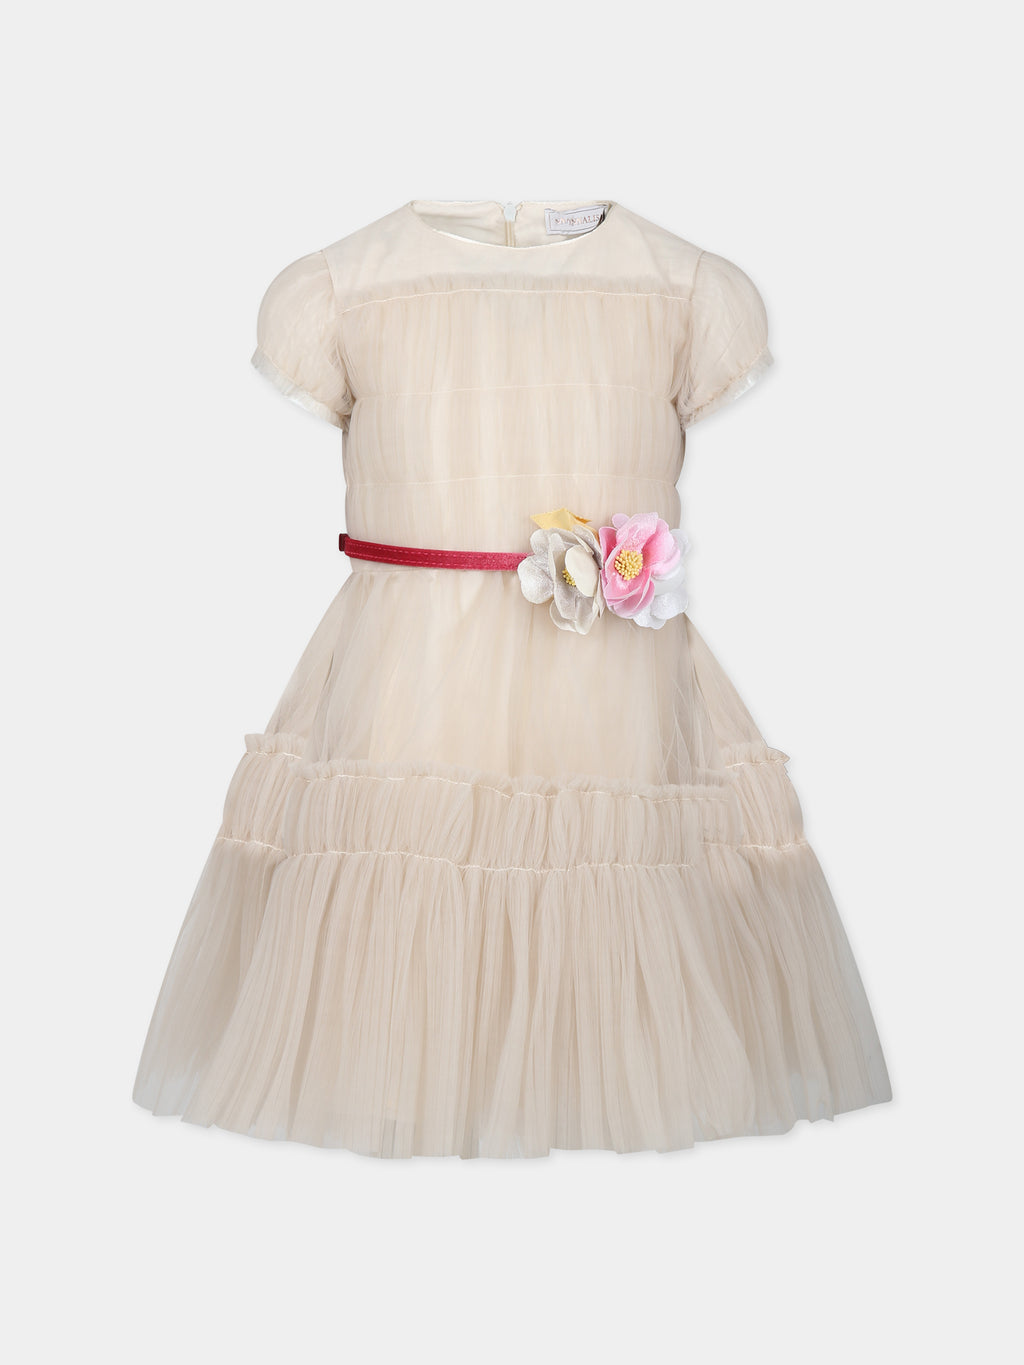 Ivory dress for girl with flowers